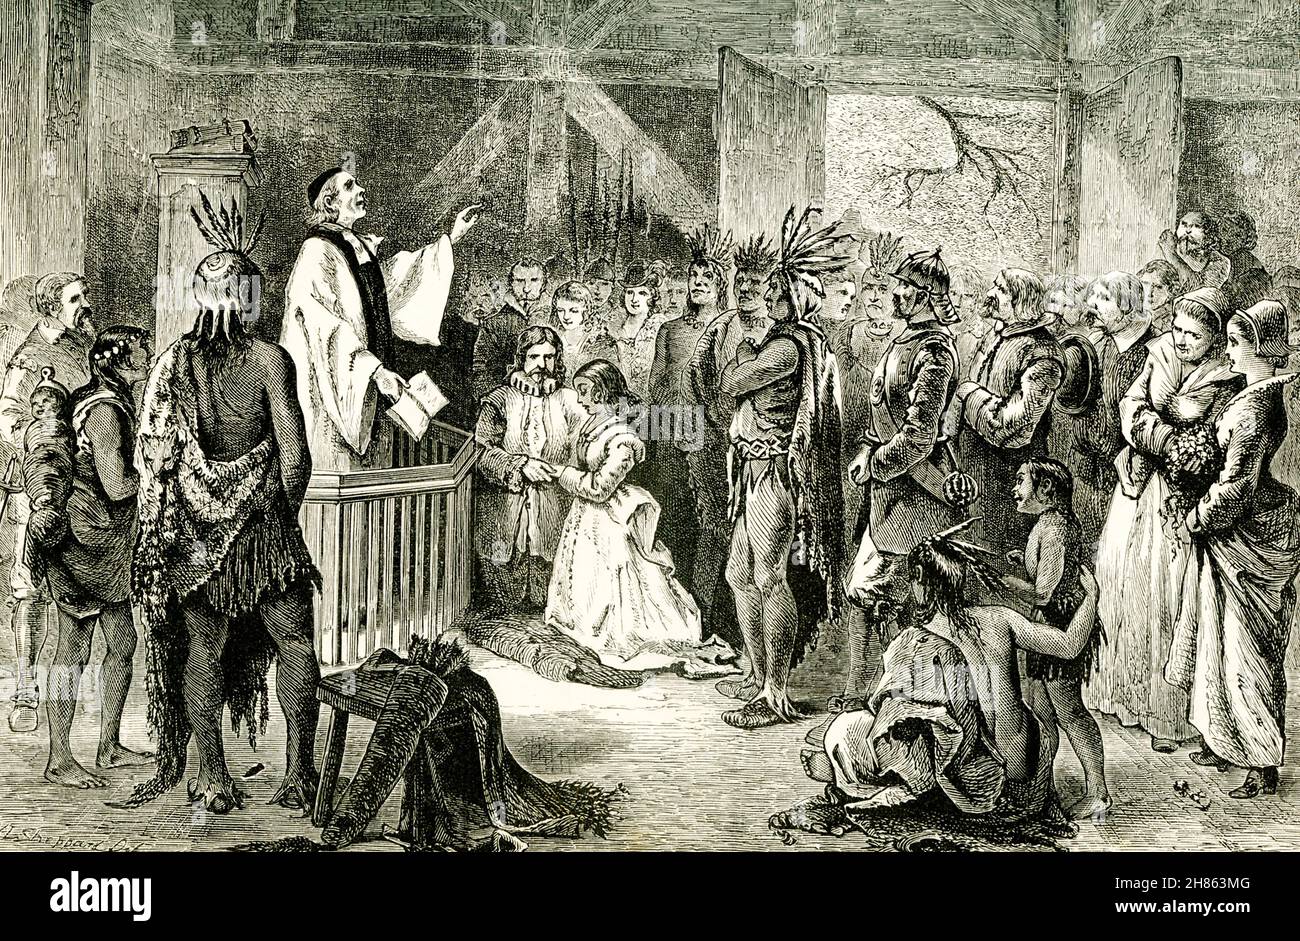 This 1890i illustration shows the marriage of Pocahontas to English tobacco planter John Rolfe in Jamestown, Virginia, in 1614. English Captain John Smith guided the colonists through difficult times in the Jamestown settlement of 1607. According to Mattaponi oral history, little Matoaka was possibly about 10 years old when John Smith and English colonists arrived in Tsenacomoca in the spring of 1607. John Smith was about 27 years old. They were never married nor involved.. Stock Photo